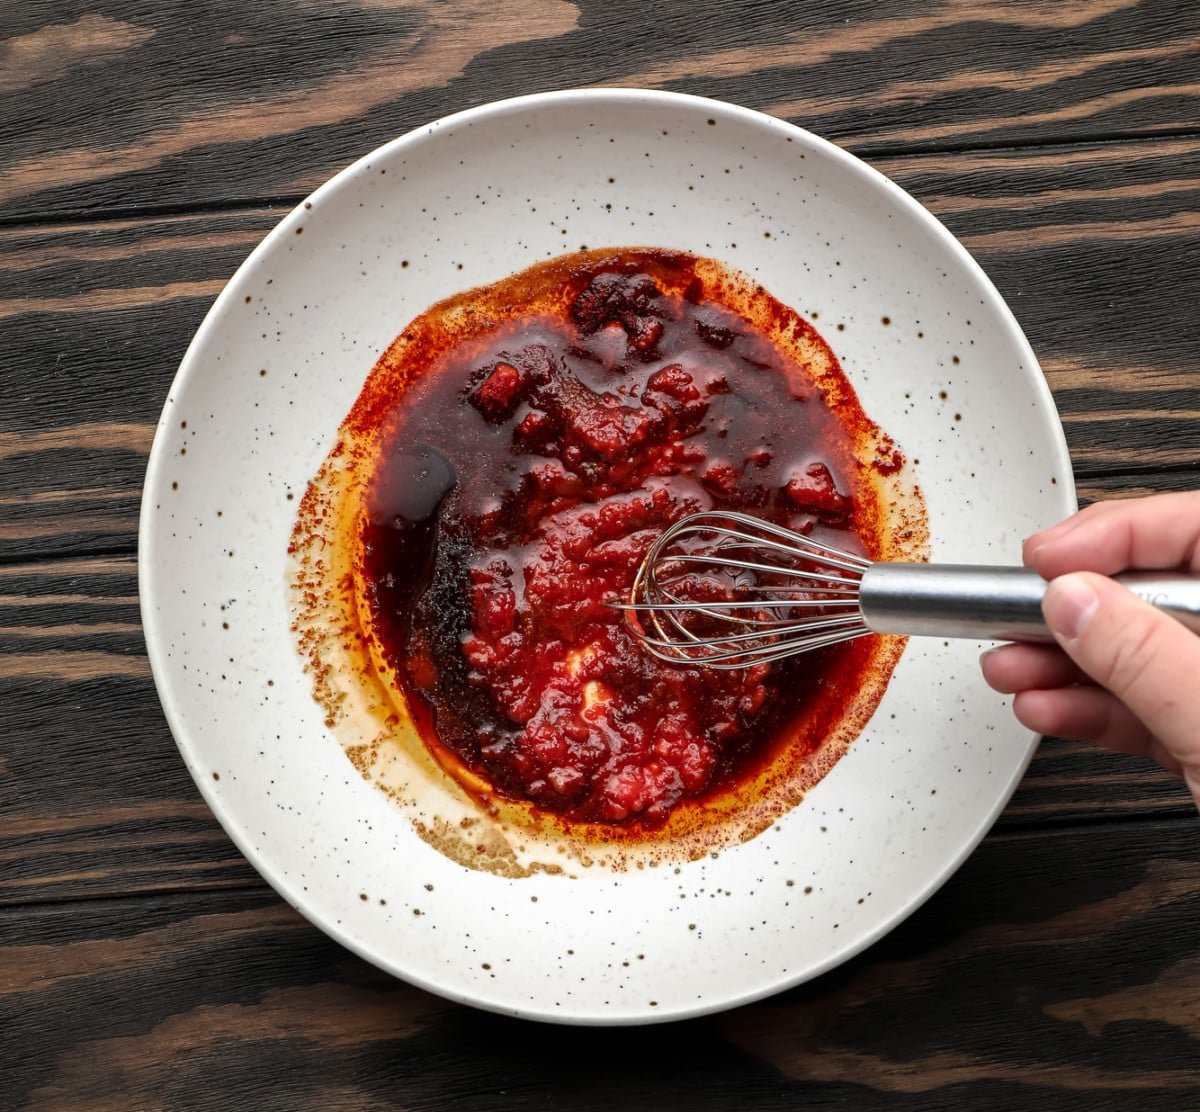 reddish sauce being mixed in a speckled bowl on wood background